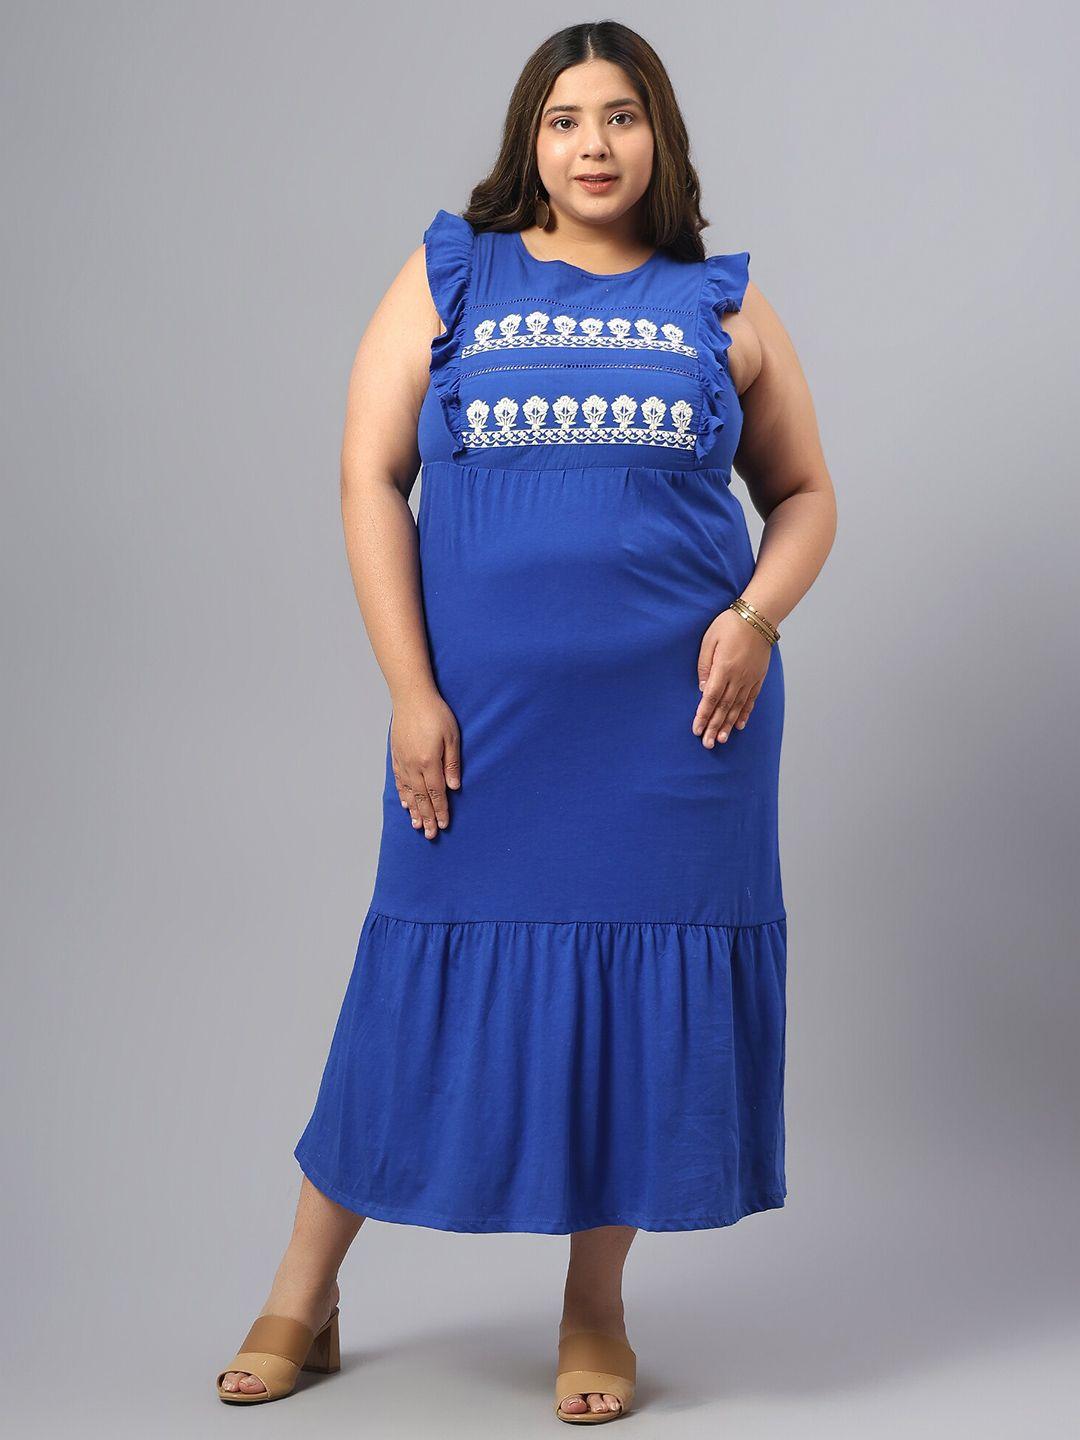 saakaa-plus-size-floral-embroidered-sleeveless-ruffles-a-line-midi-dress